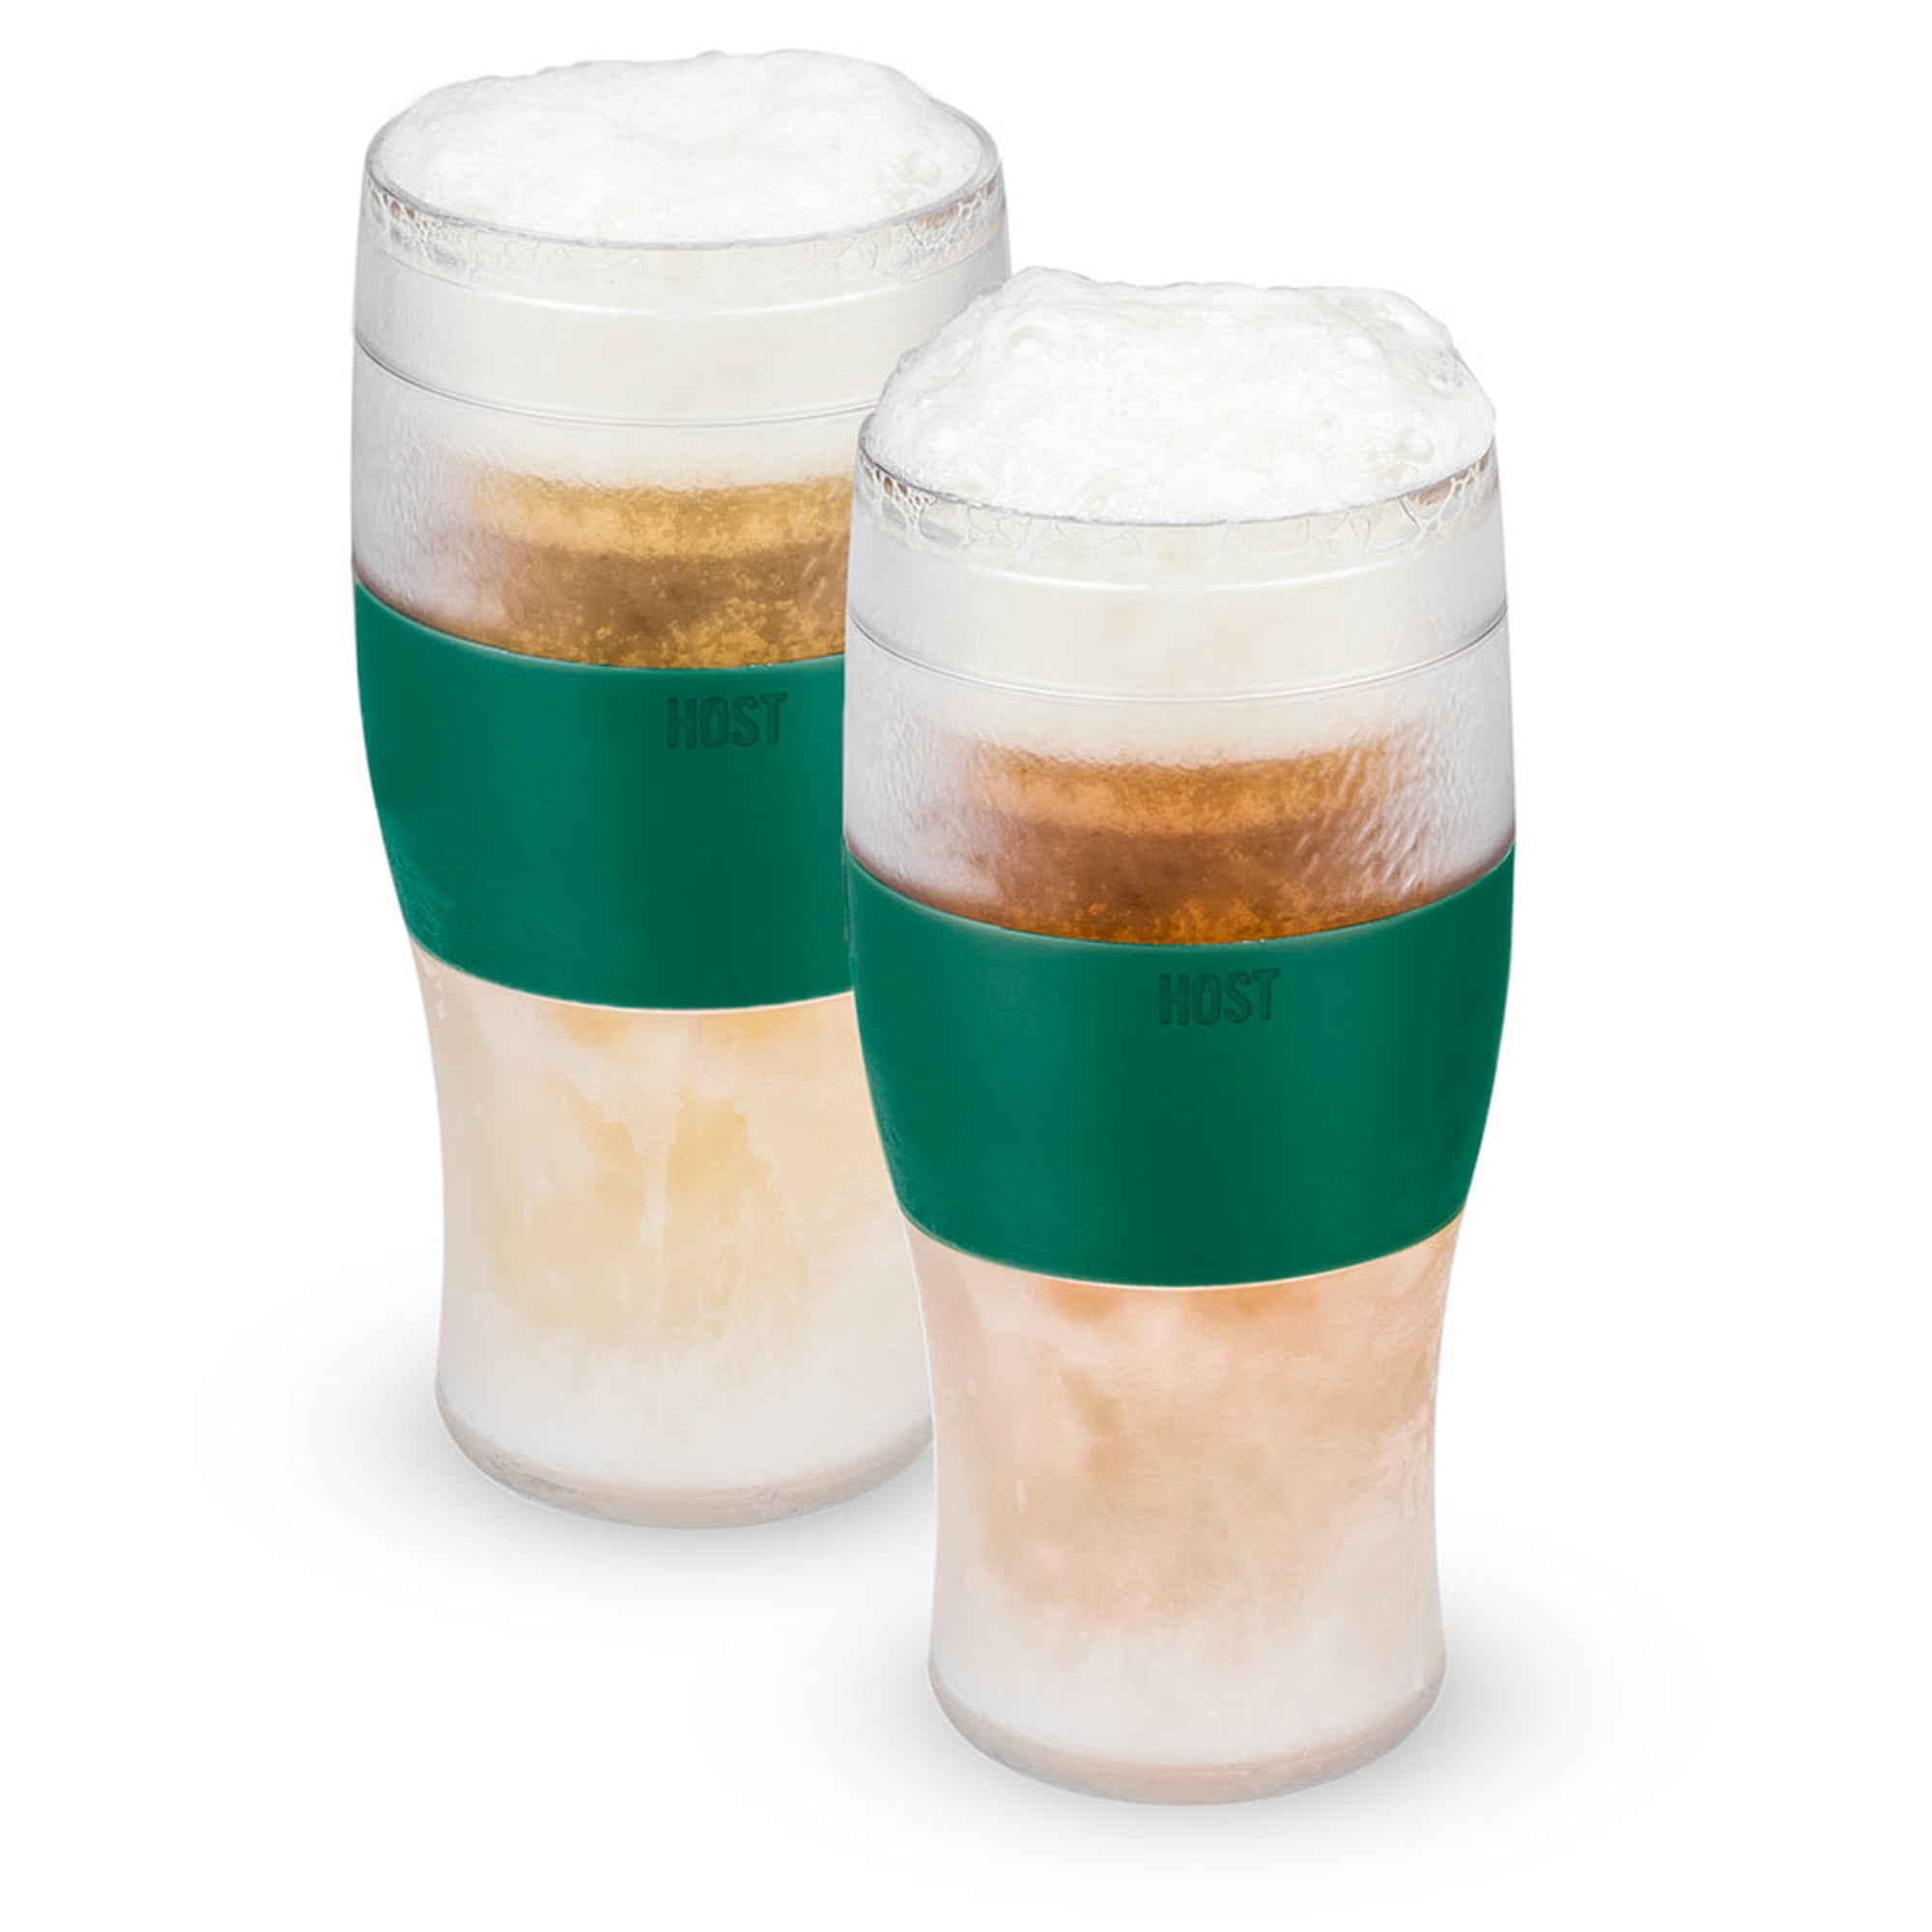 Host Freeze Beer Glasses - Double Walled Insulated Plastic Pint Glasses,  Green